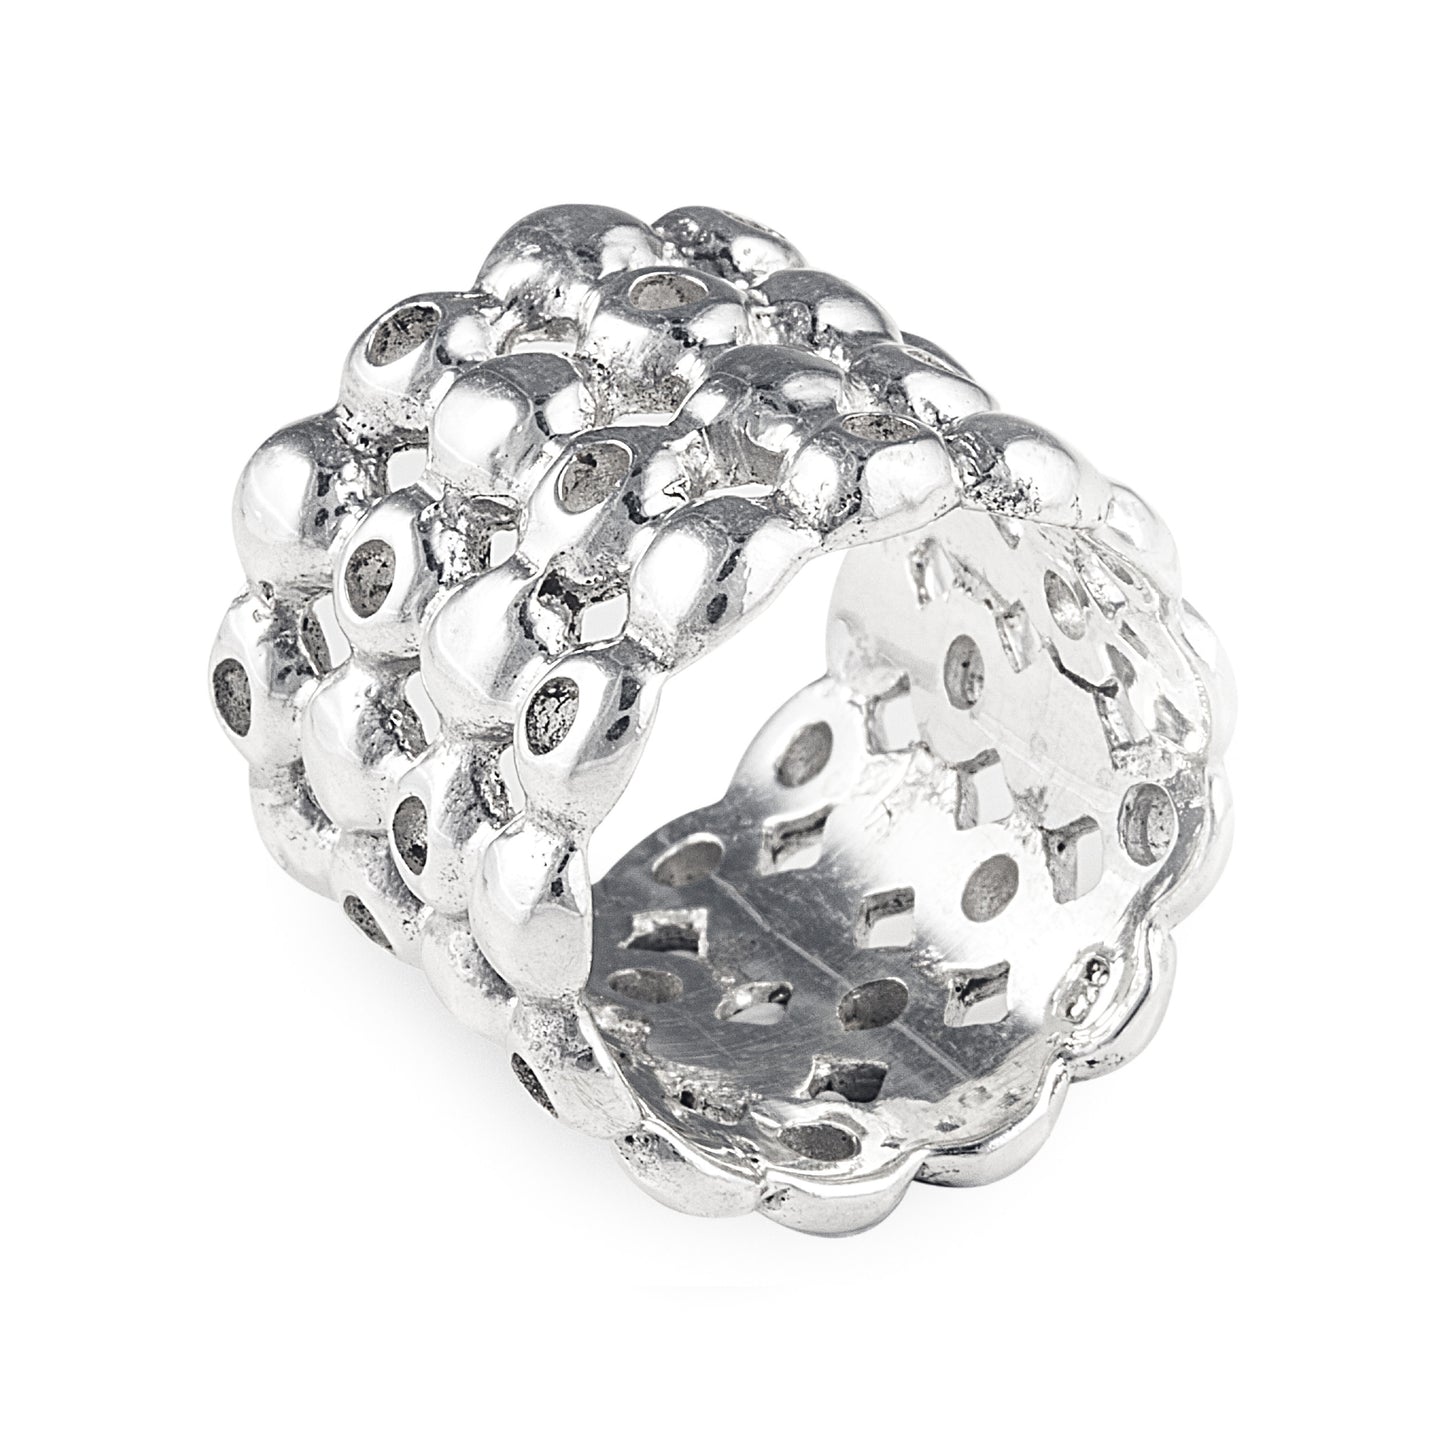 The modern Mexican designed Bubble Ring is made of 925 sterling silver and features bubbles that wrap around your finger. Shop rings & affordable luxury jewellery by Bellagio & Co. Worldwide shipping